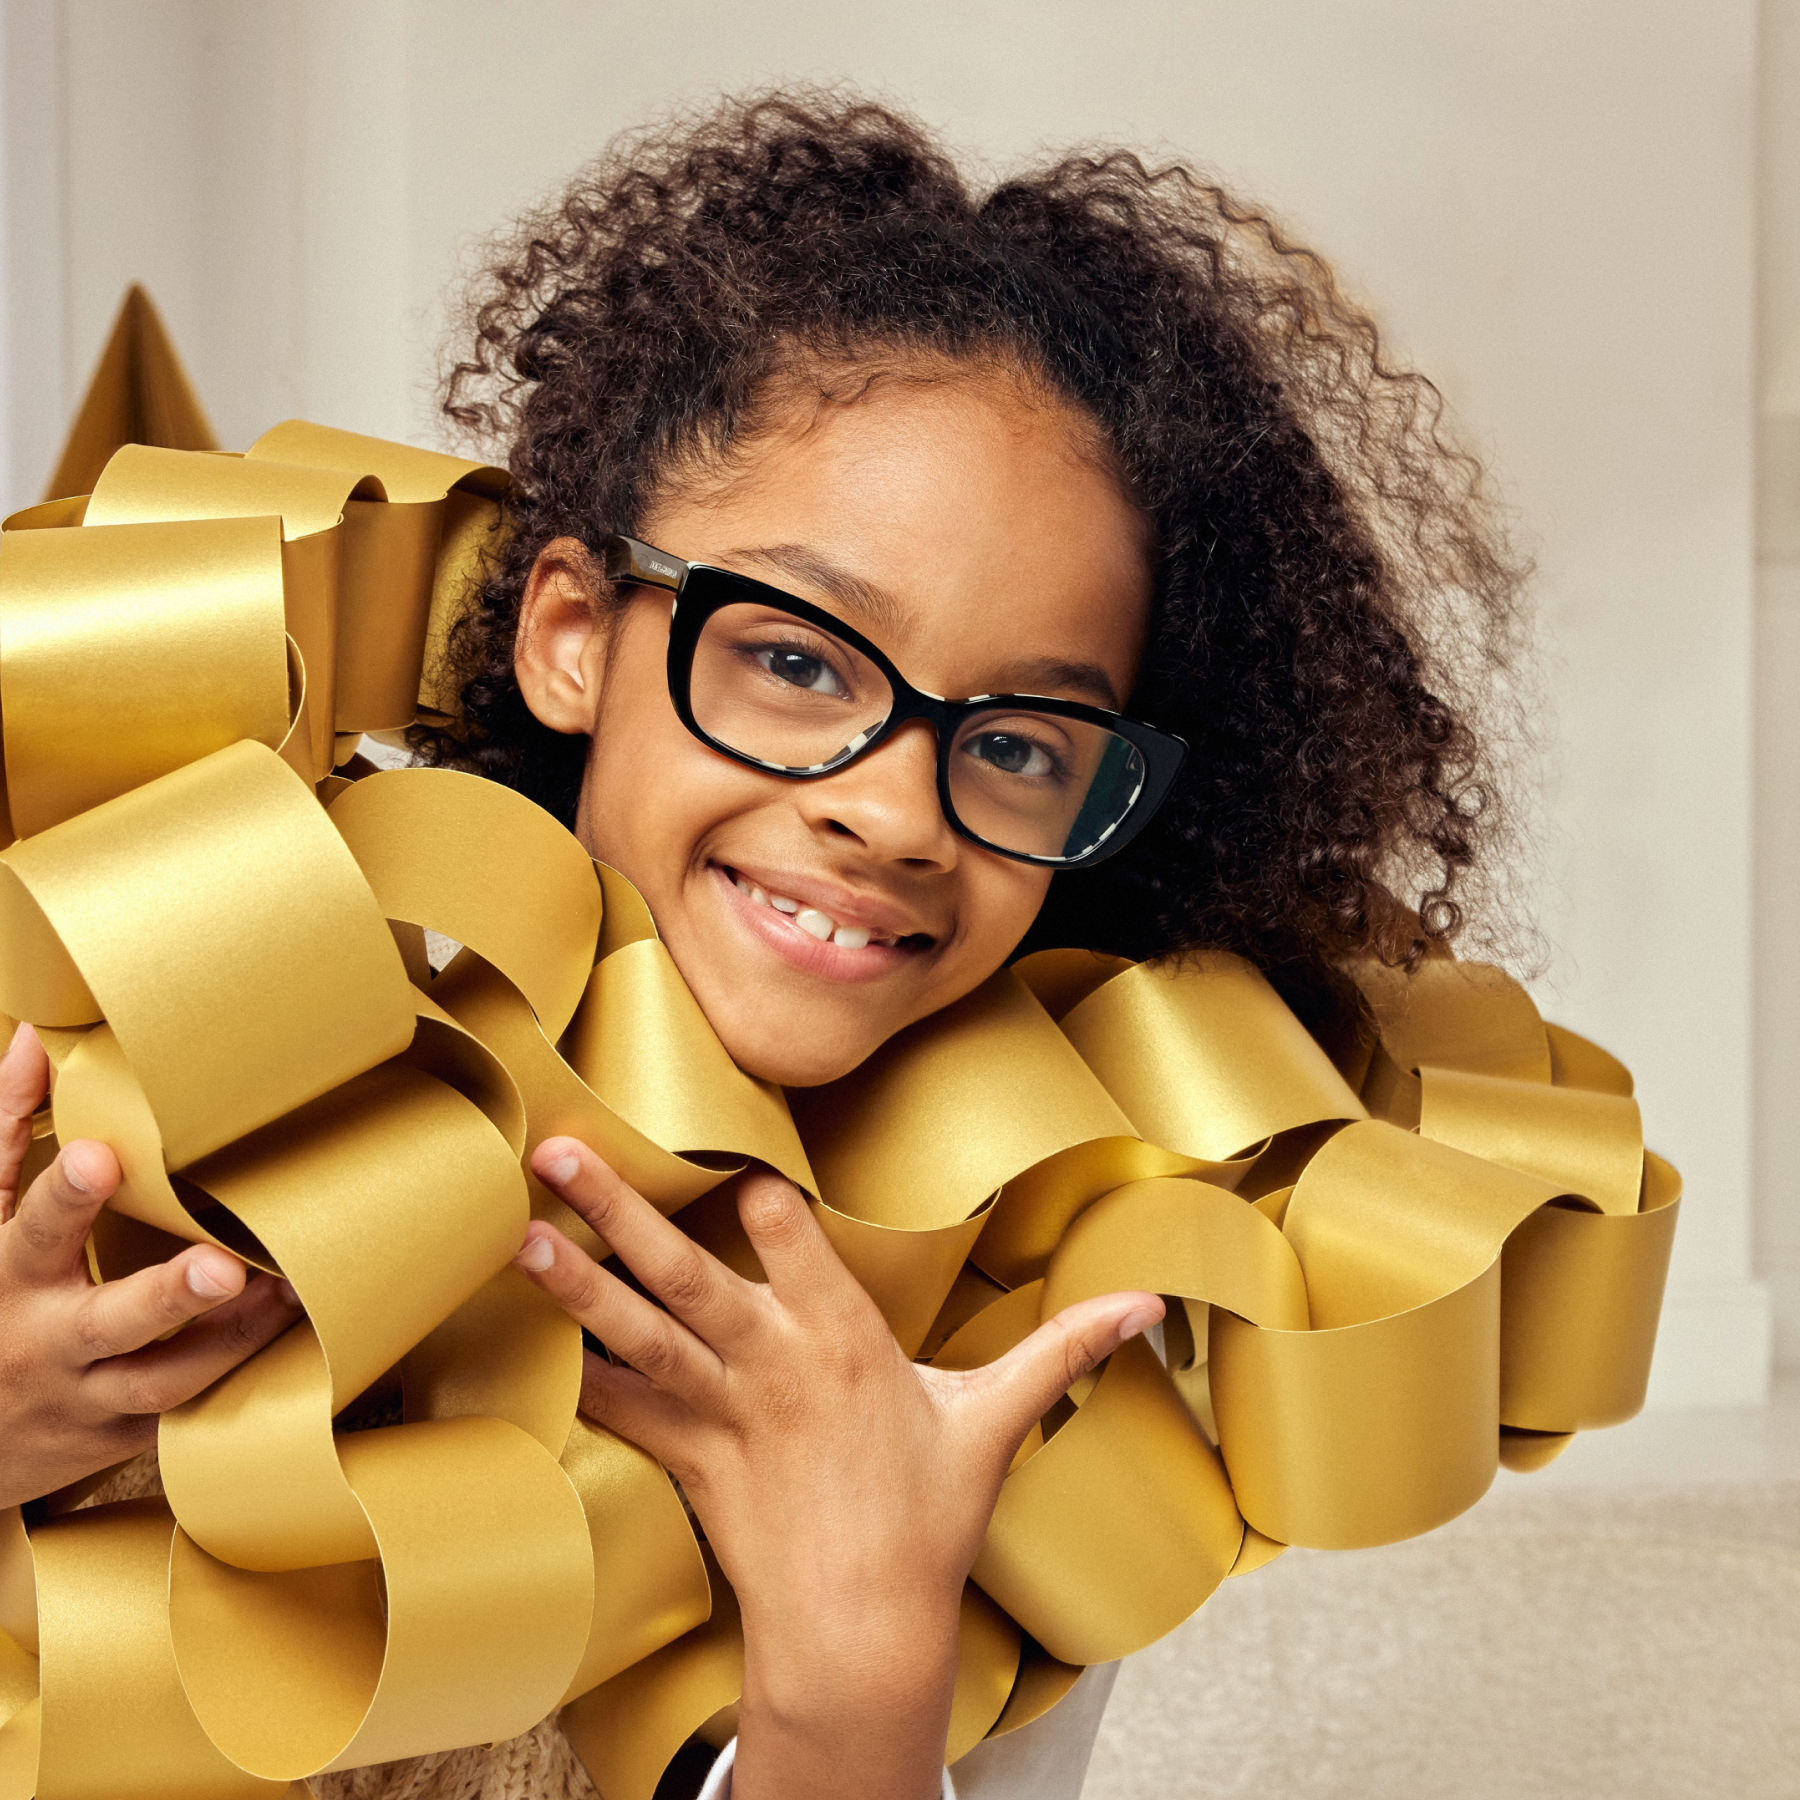 Make their holidays sparkle from LensCrafters